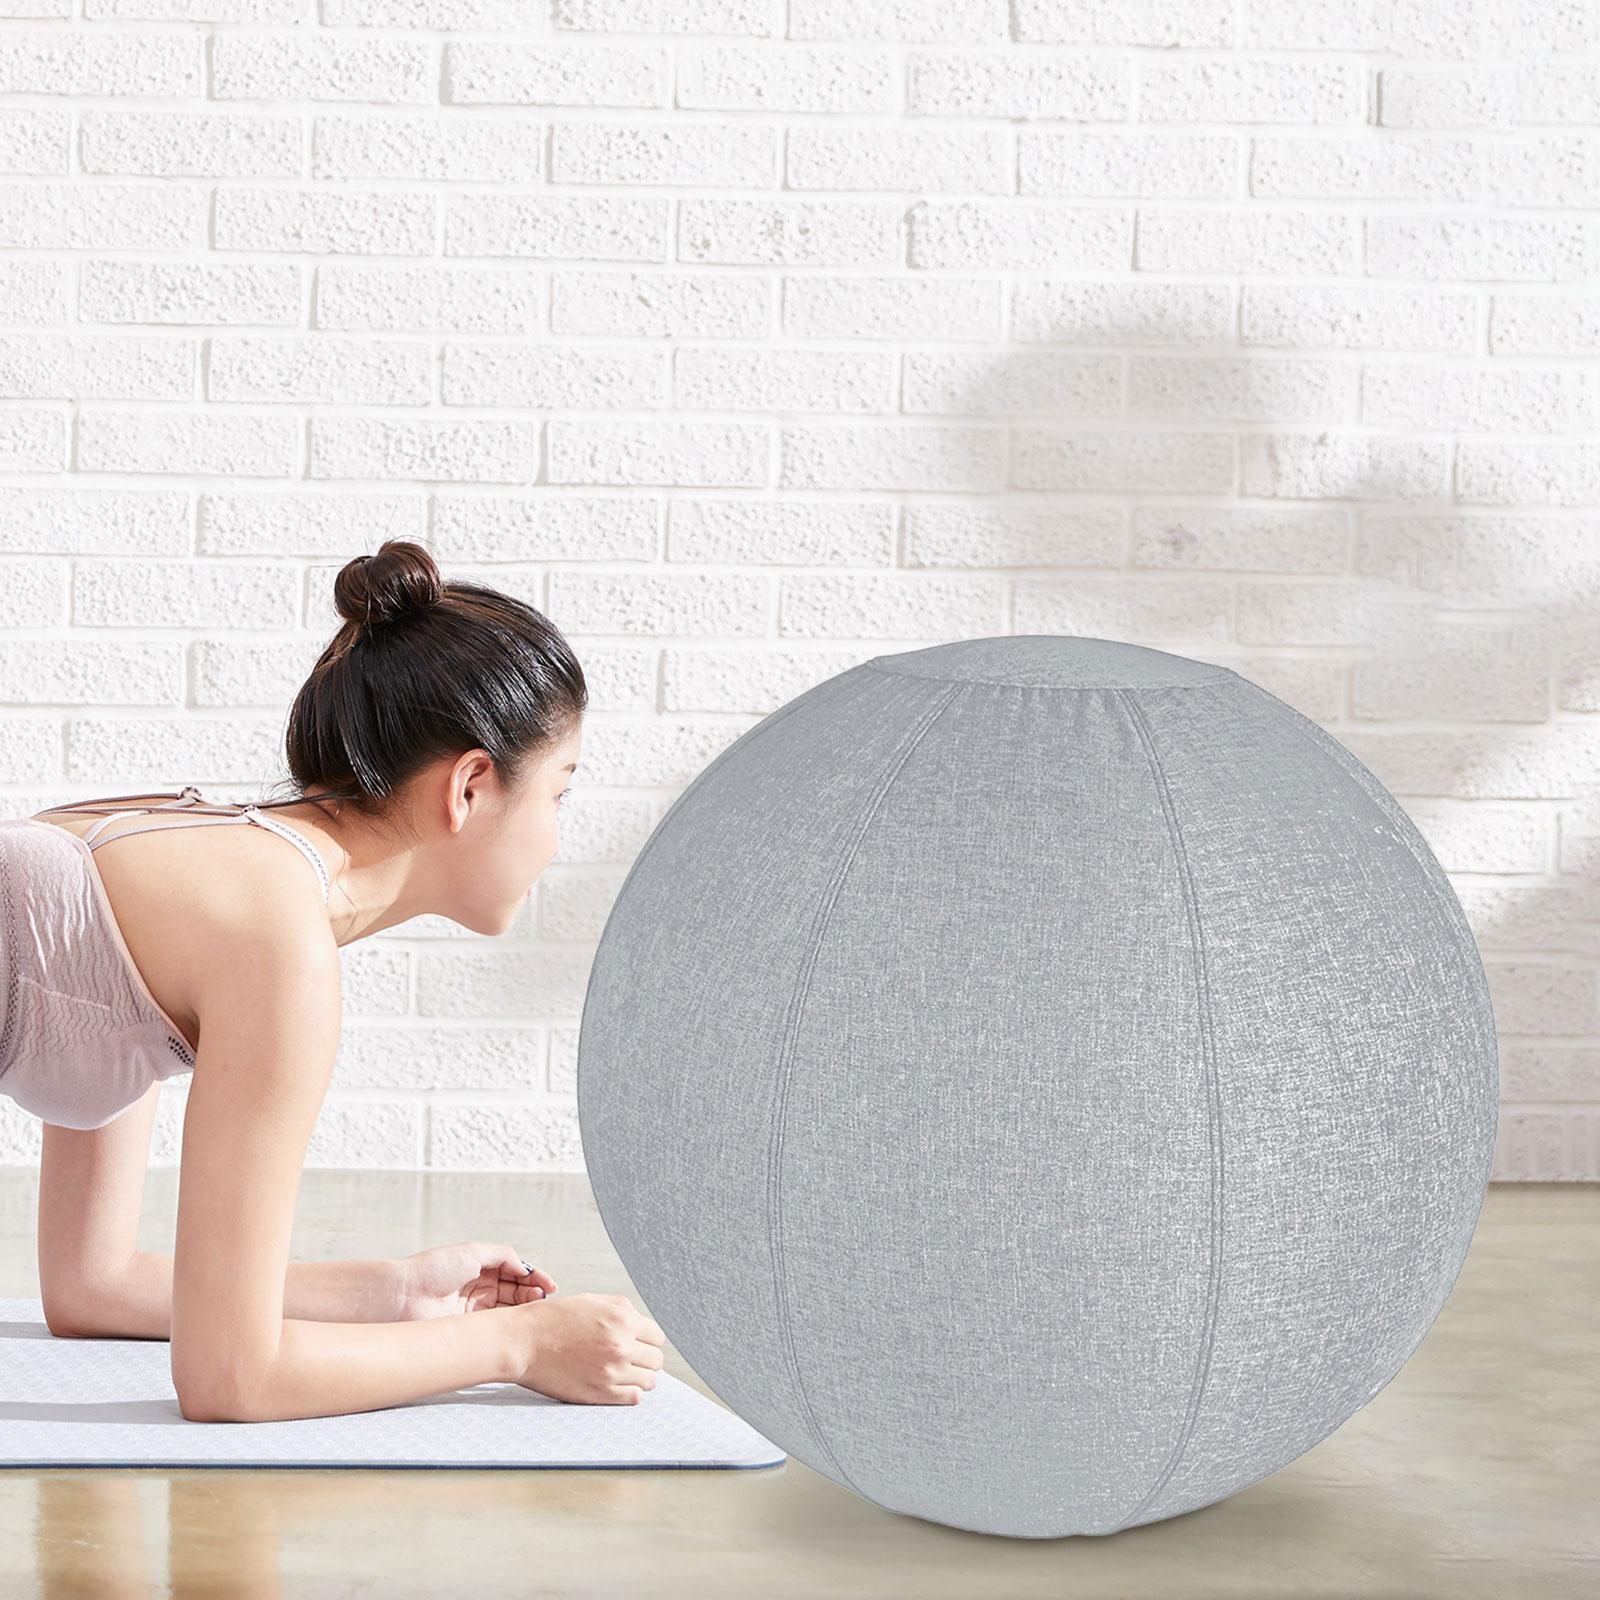 Pilates Yoga Ball Cover, Sitting Balls Cover with Carry Handles, Foldable Balance Ball Cover, Birthing Sitting Balls Chair Protector